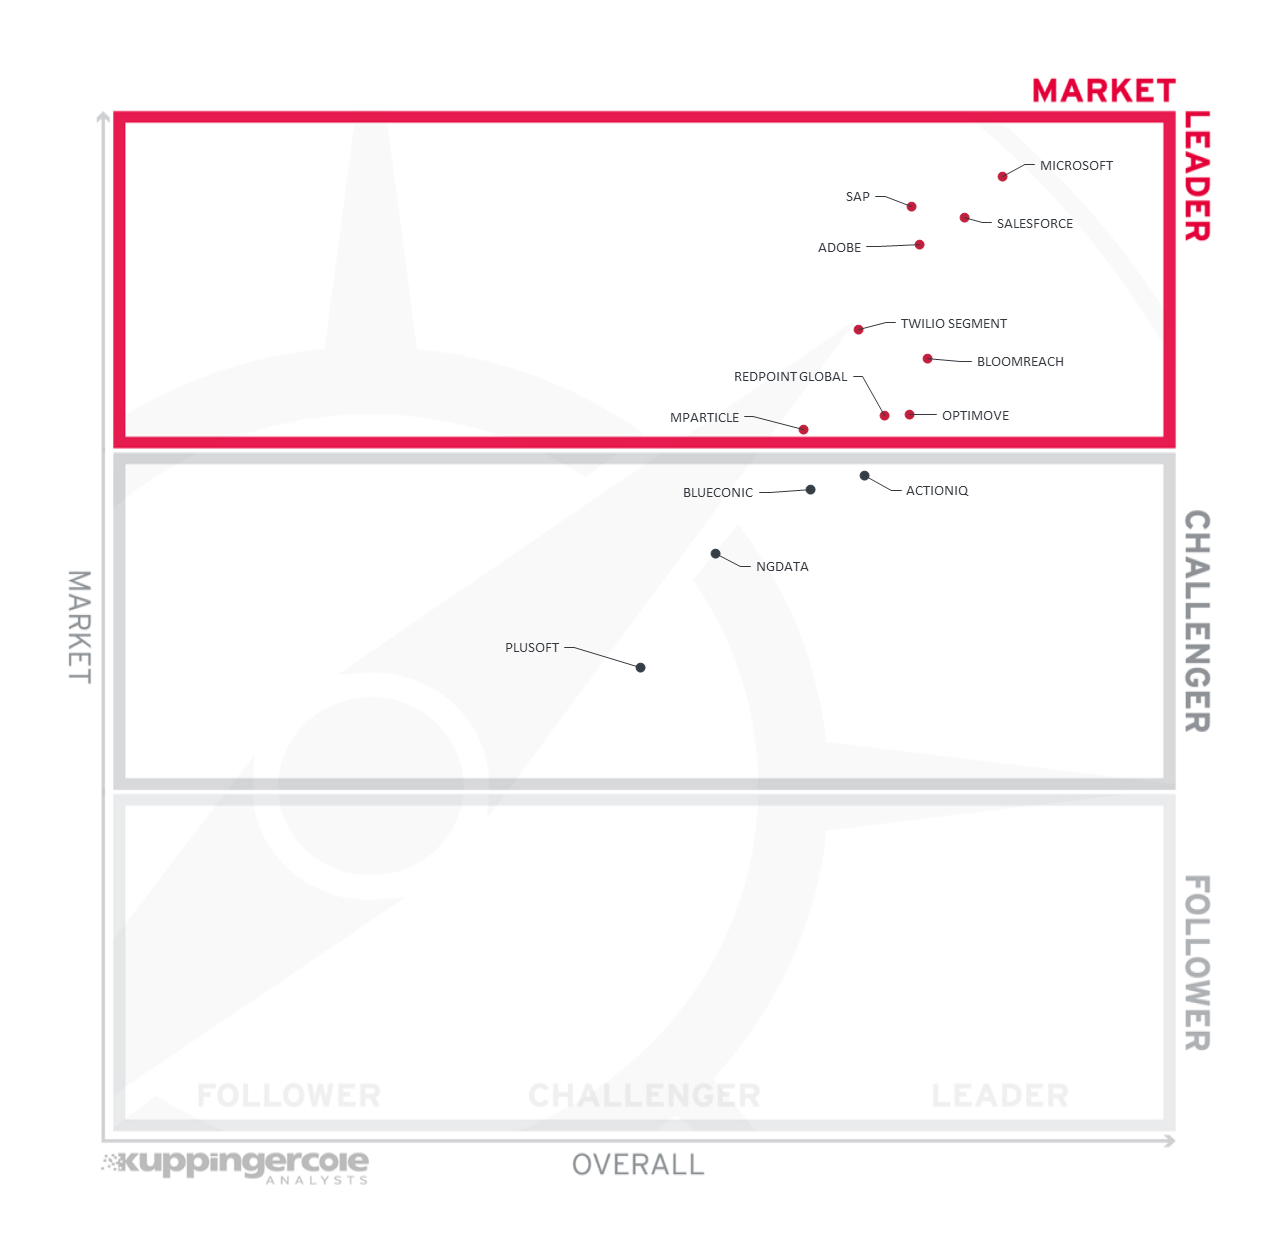 The Market Leadership rating for the LC Customer Data Platforms.